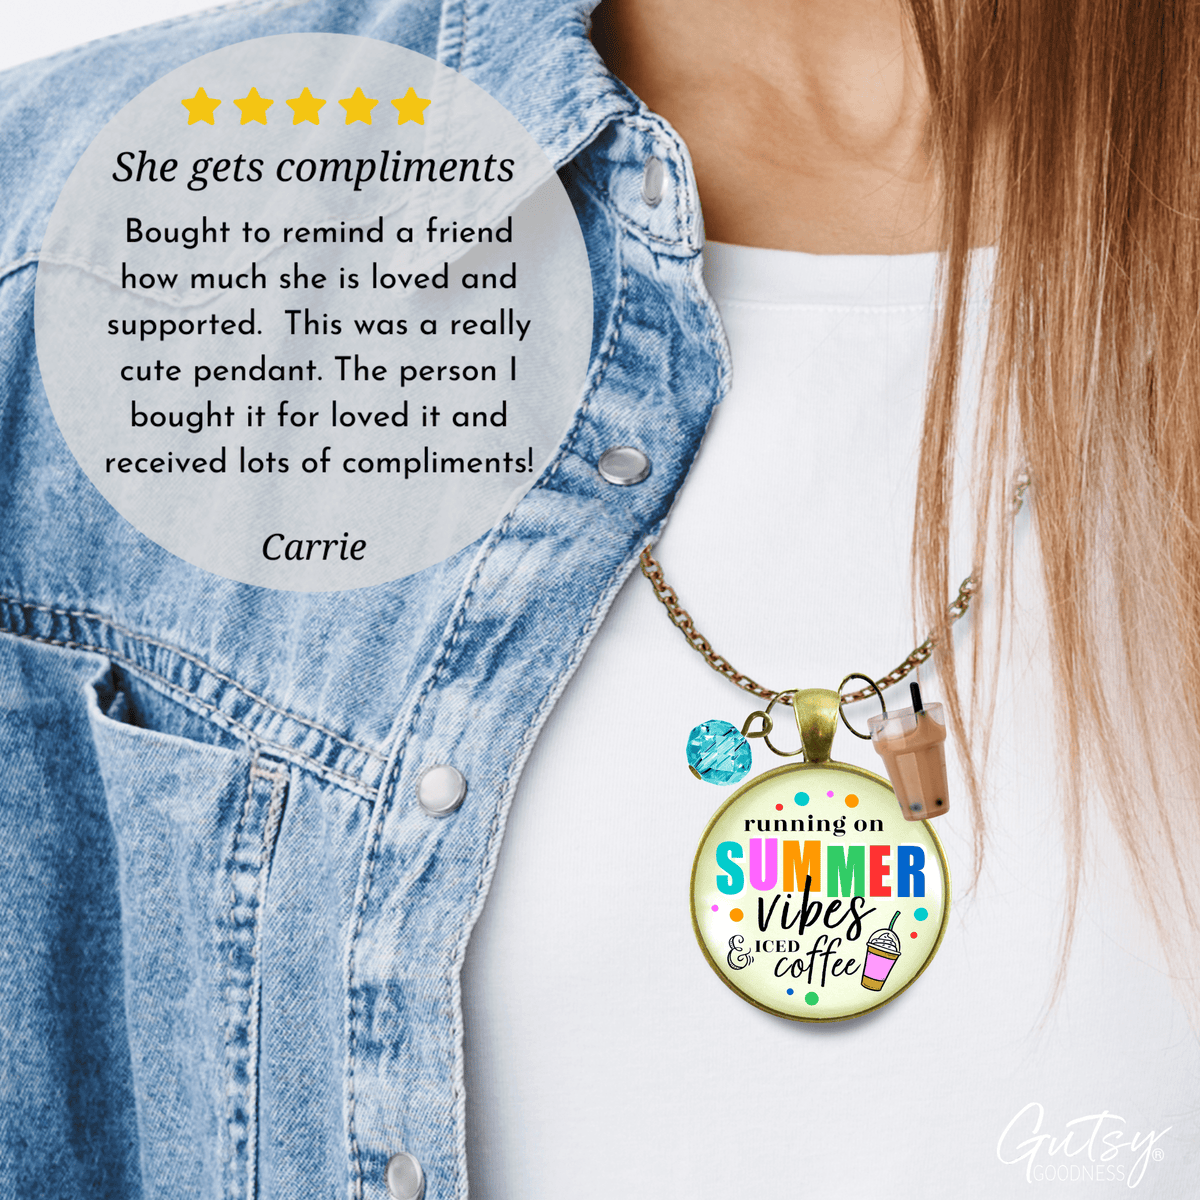 Summer Vibes Iced Coffee Necklace Colorful Beach Life Handmade Retro Chic Pendant Summertime Quote Coffee Lover BFF Gift Resin Kawaii Charm  Necklace - Gutsy Goodness Handmade Jewelry